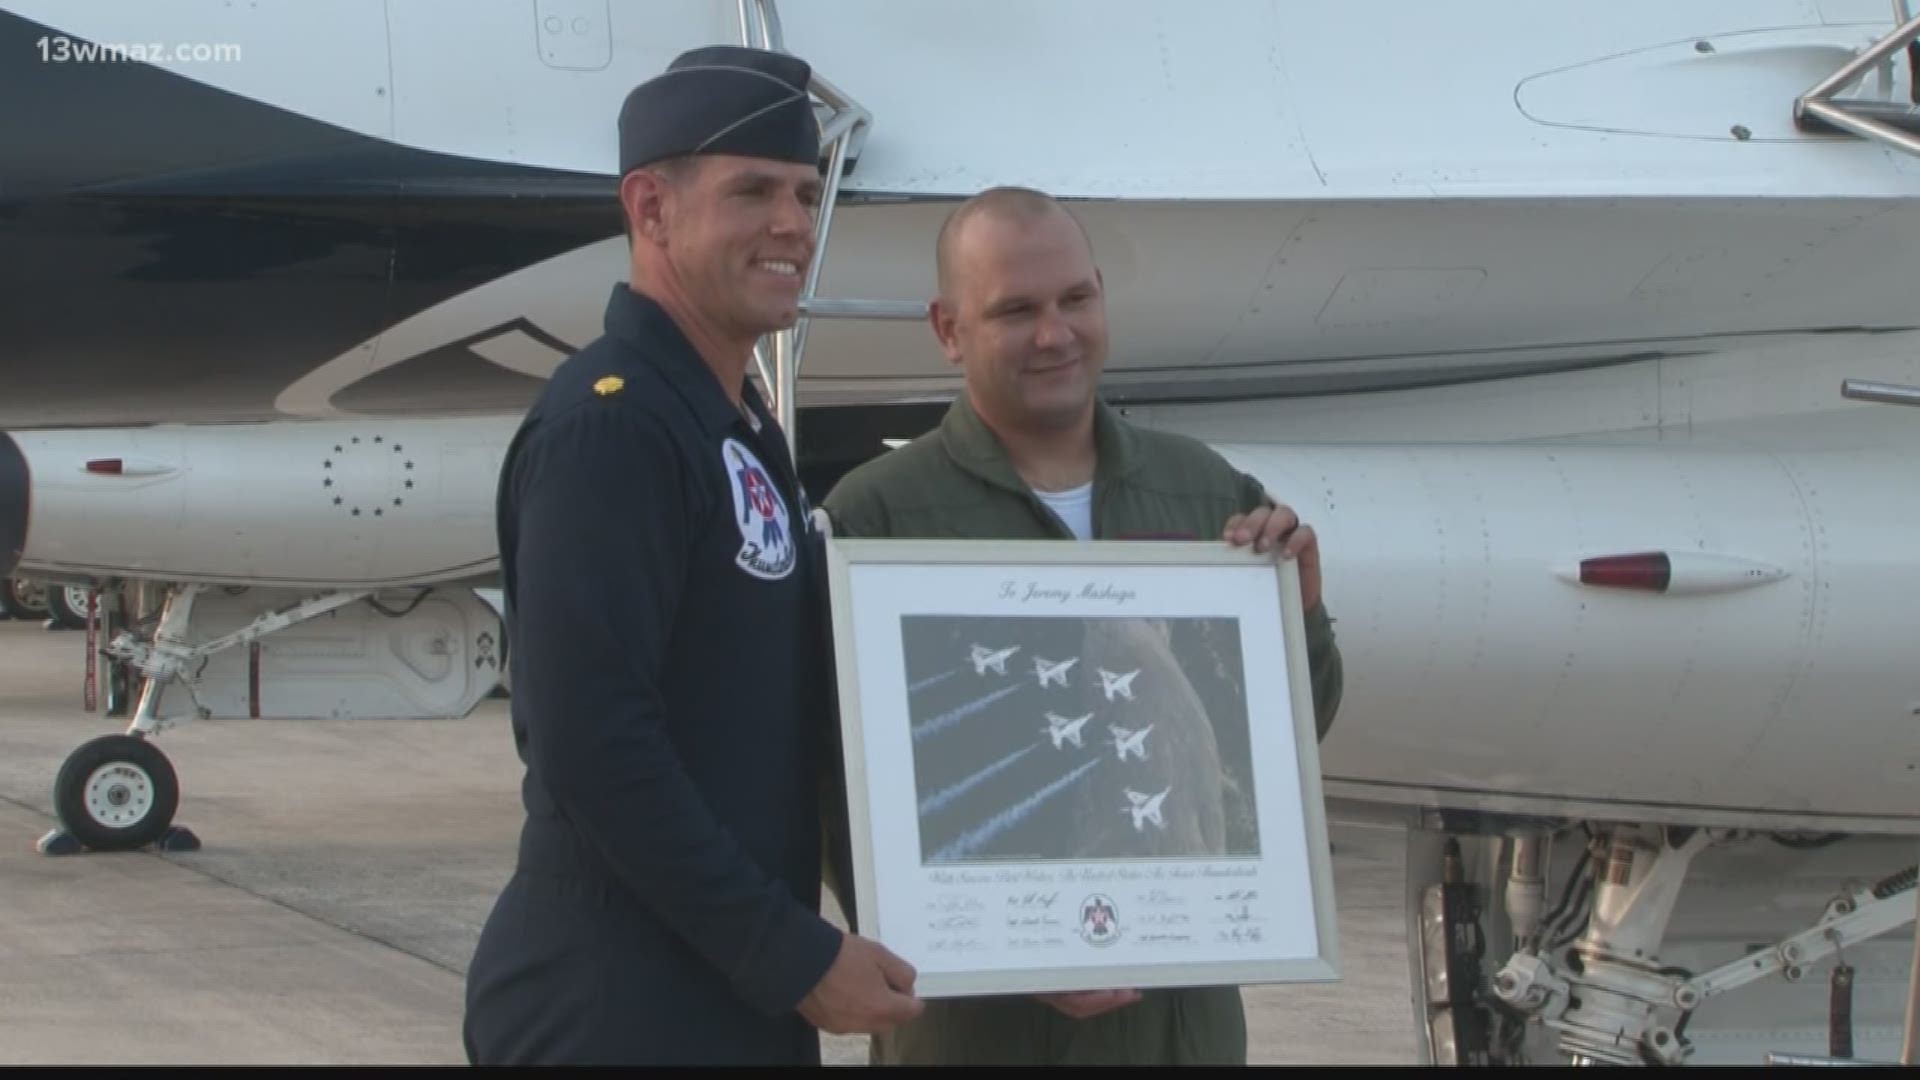 A year after getting shot in the line of duty, Houston County sheriff's deputy Jeremy Mashuga took the flight of his life as the Robins Air Show's Hometown Hero Thur